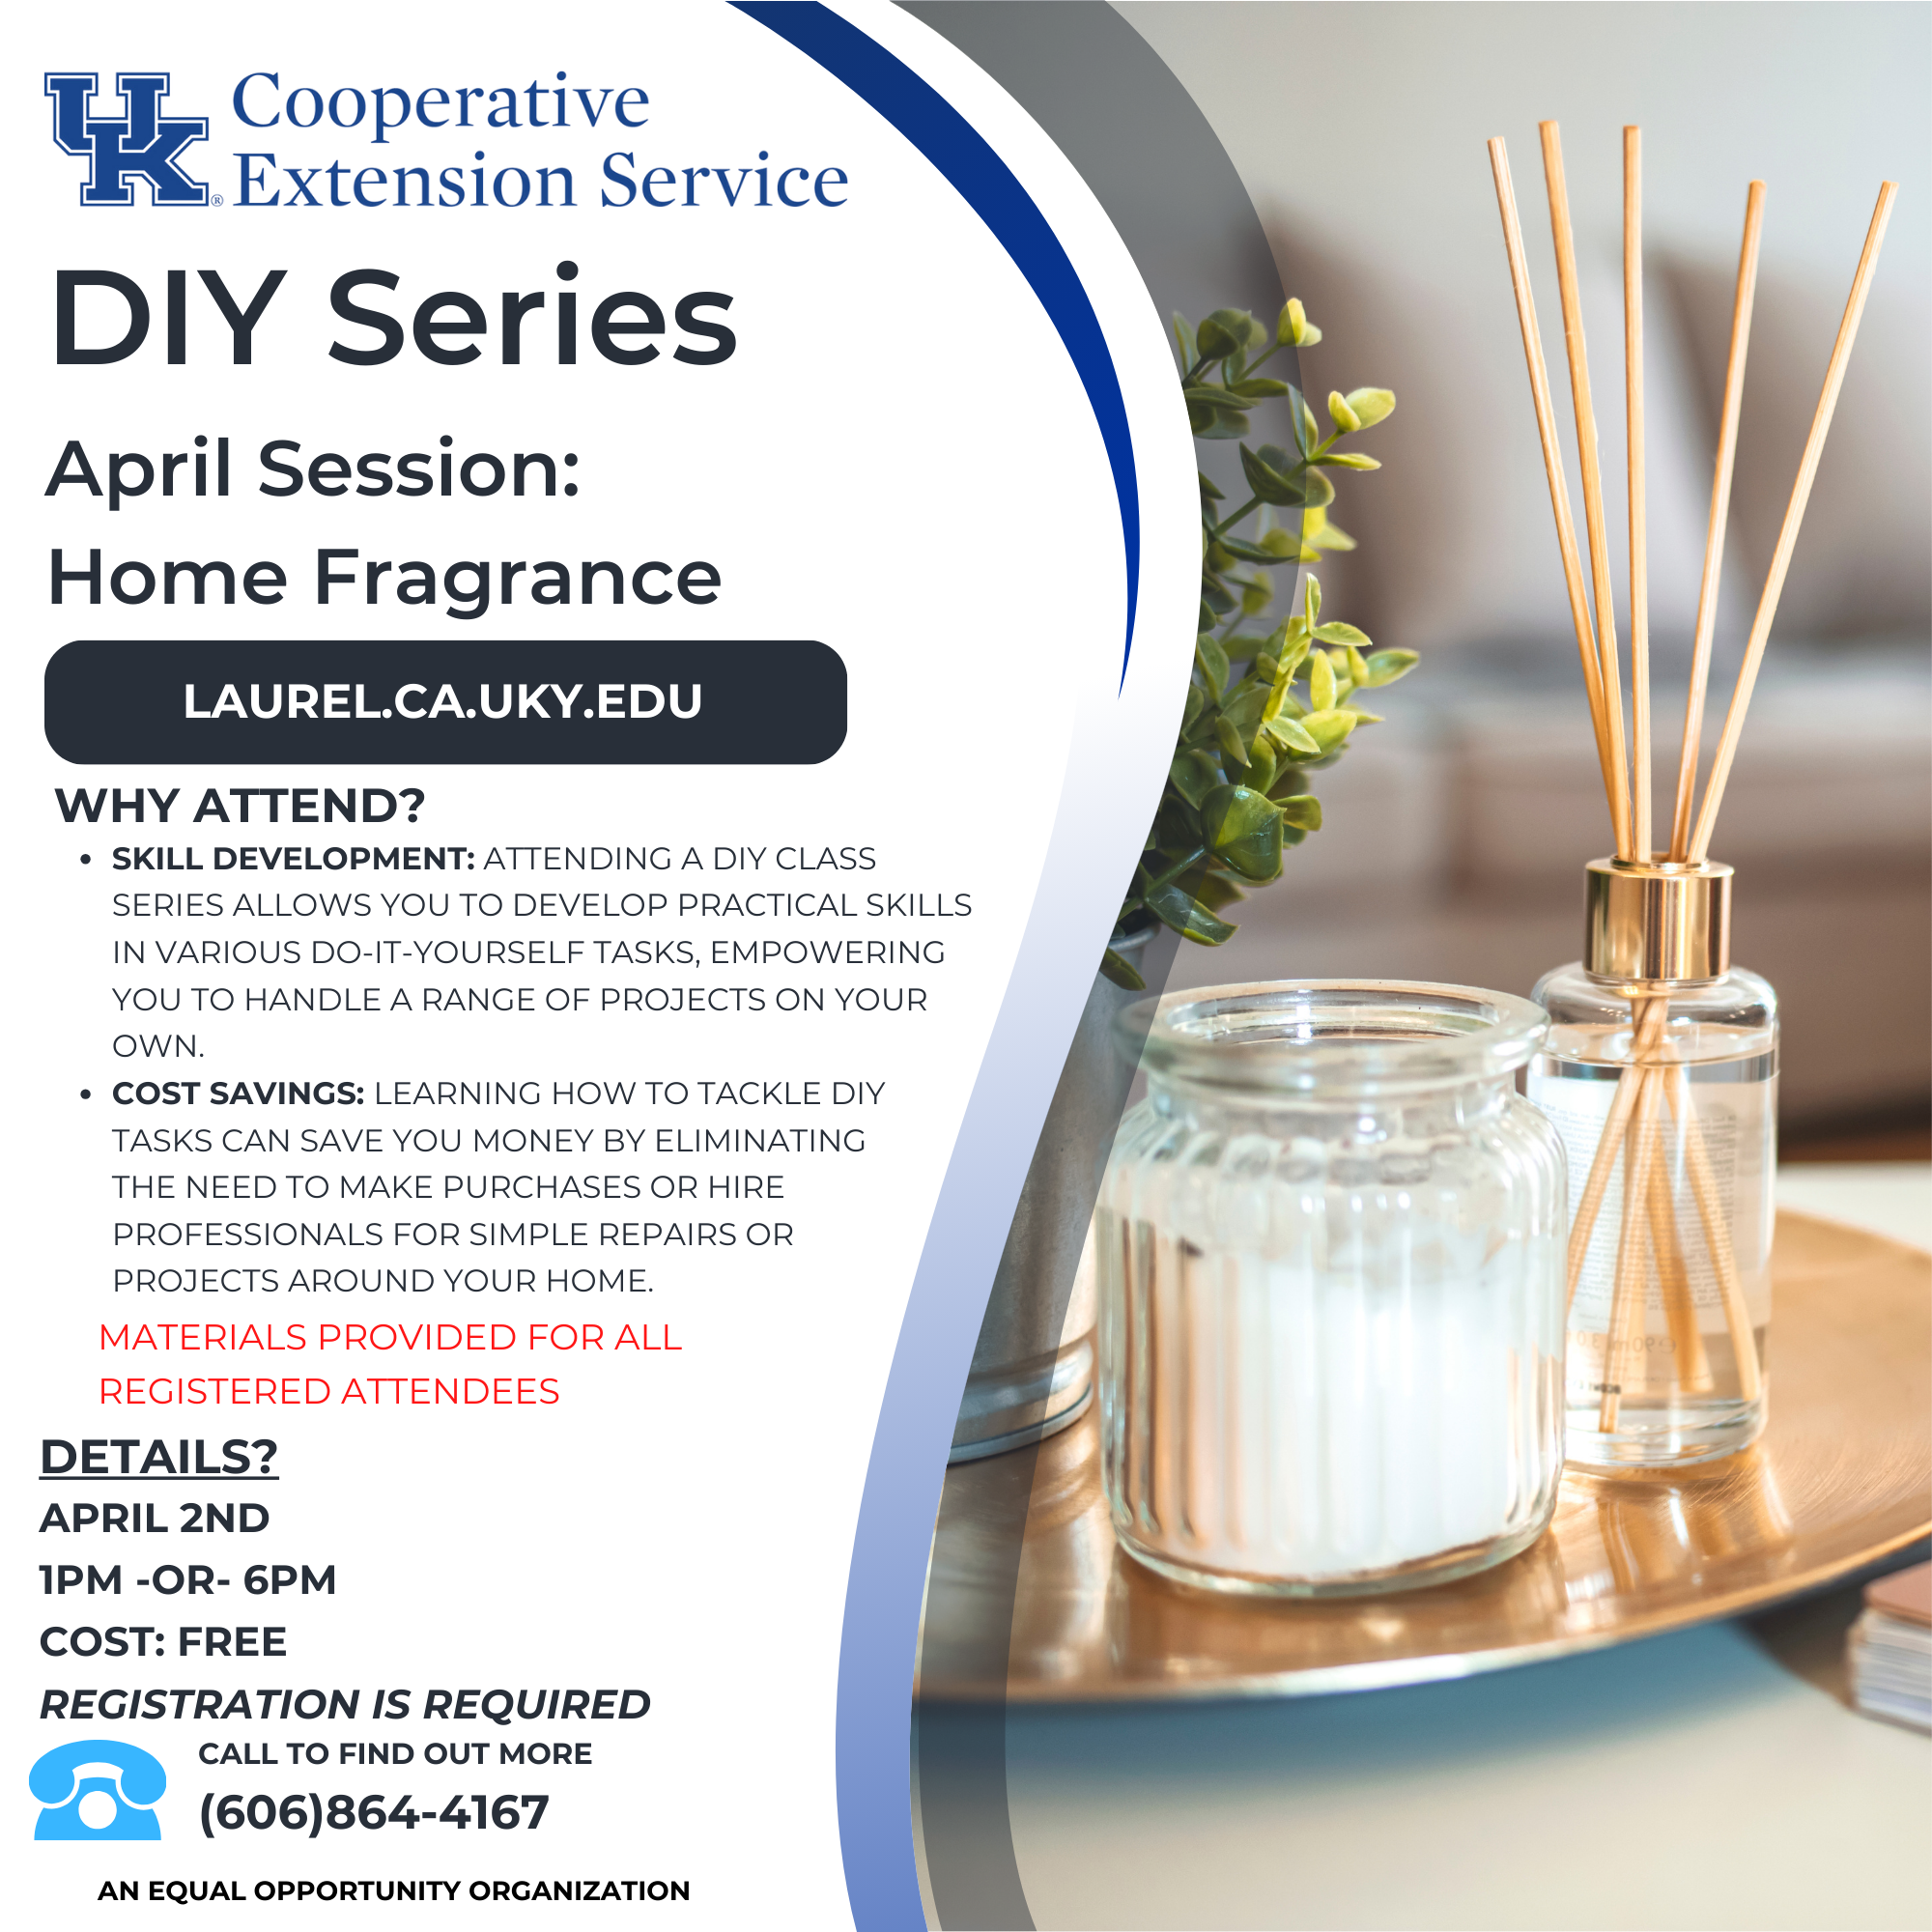 Flyer with background containing candles stating "DIY Series: Home Fragrance" and includes class date details.